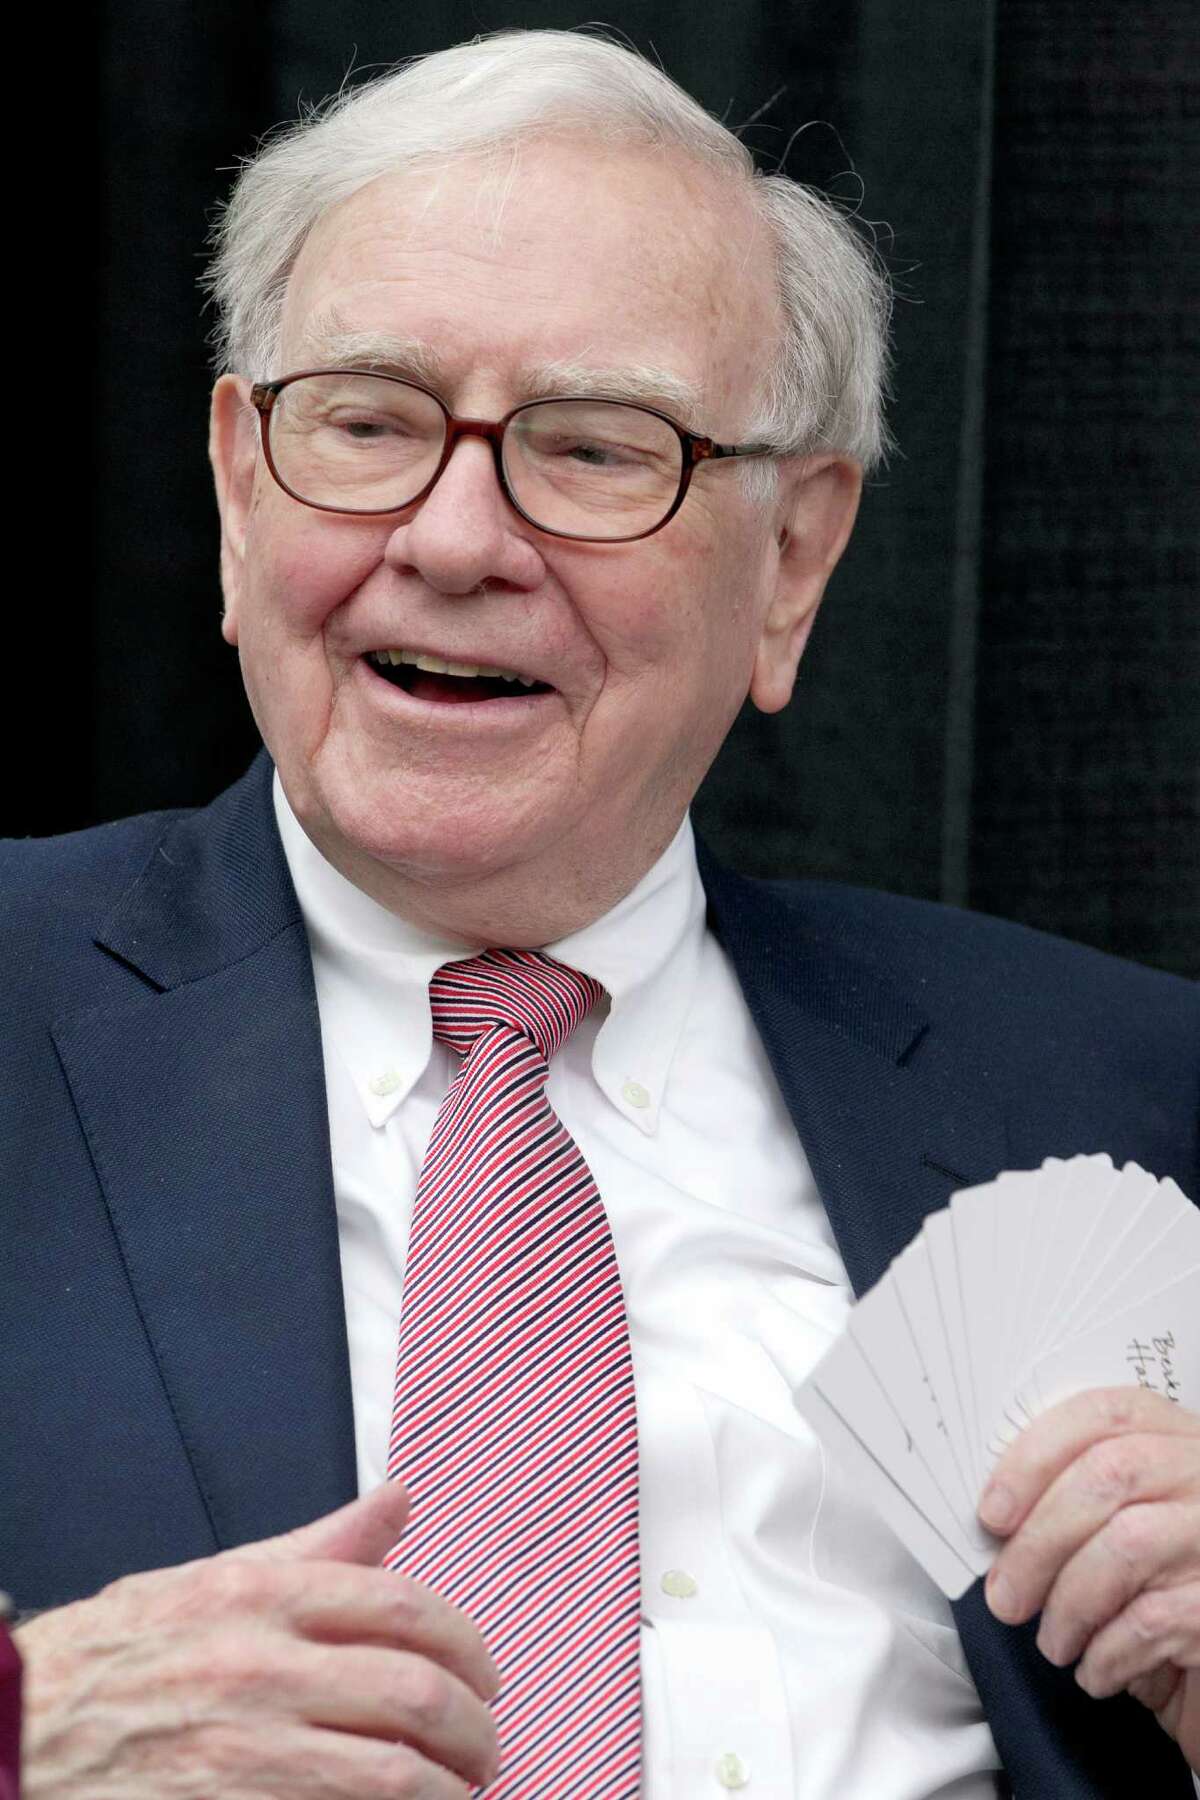 FILE- In this May 6, 2012, file photo,Warren Buffett, chairman and CEO of Berkshire Hathaway, plays bridge during the annual shareholders meeting in Omaha, Neb. Warren Buffett will release his annual letter to the shareholders on Friday, March 1, 2013. (AP Photo/Nati Harnik)